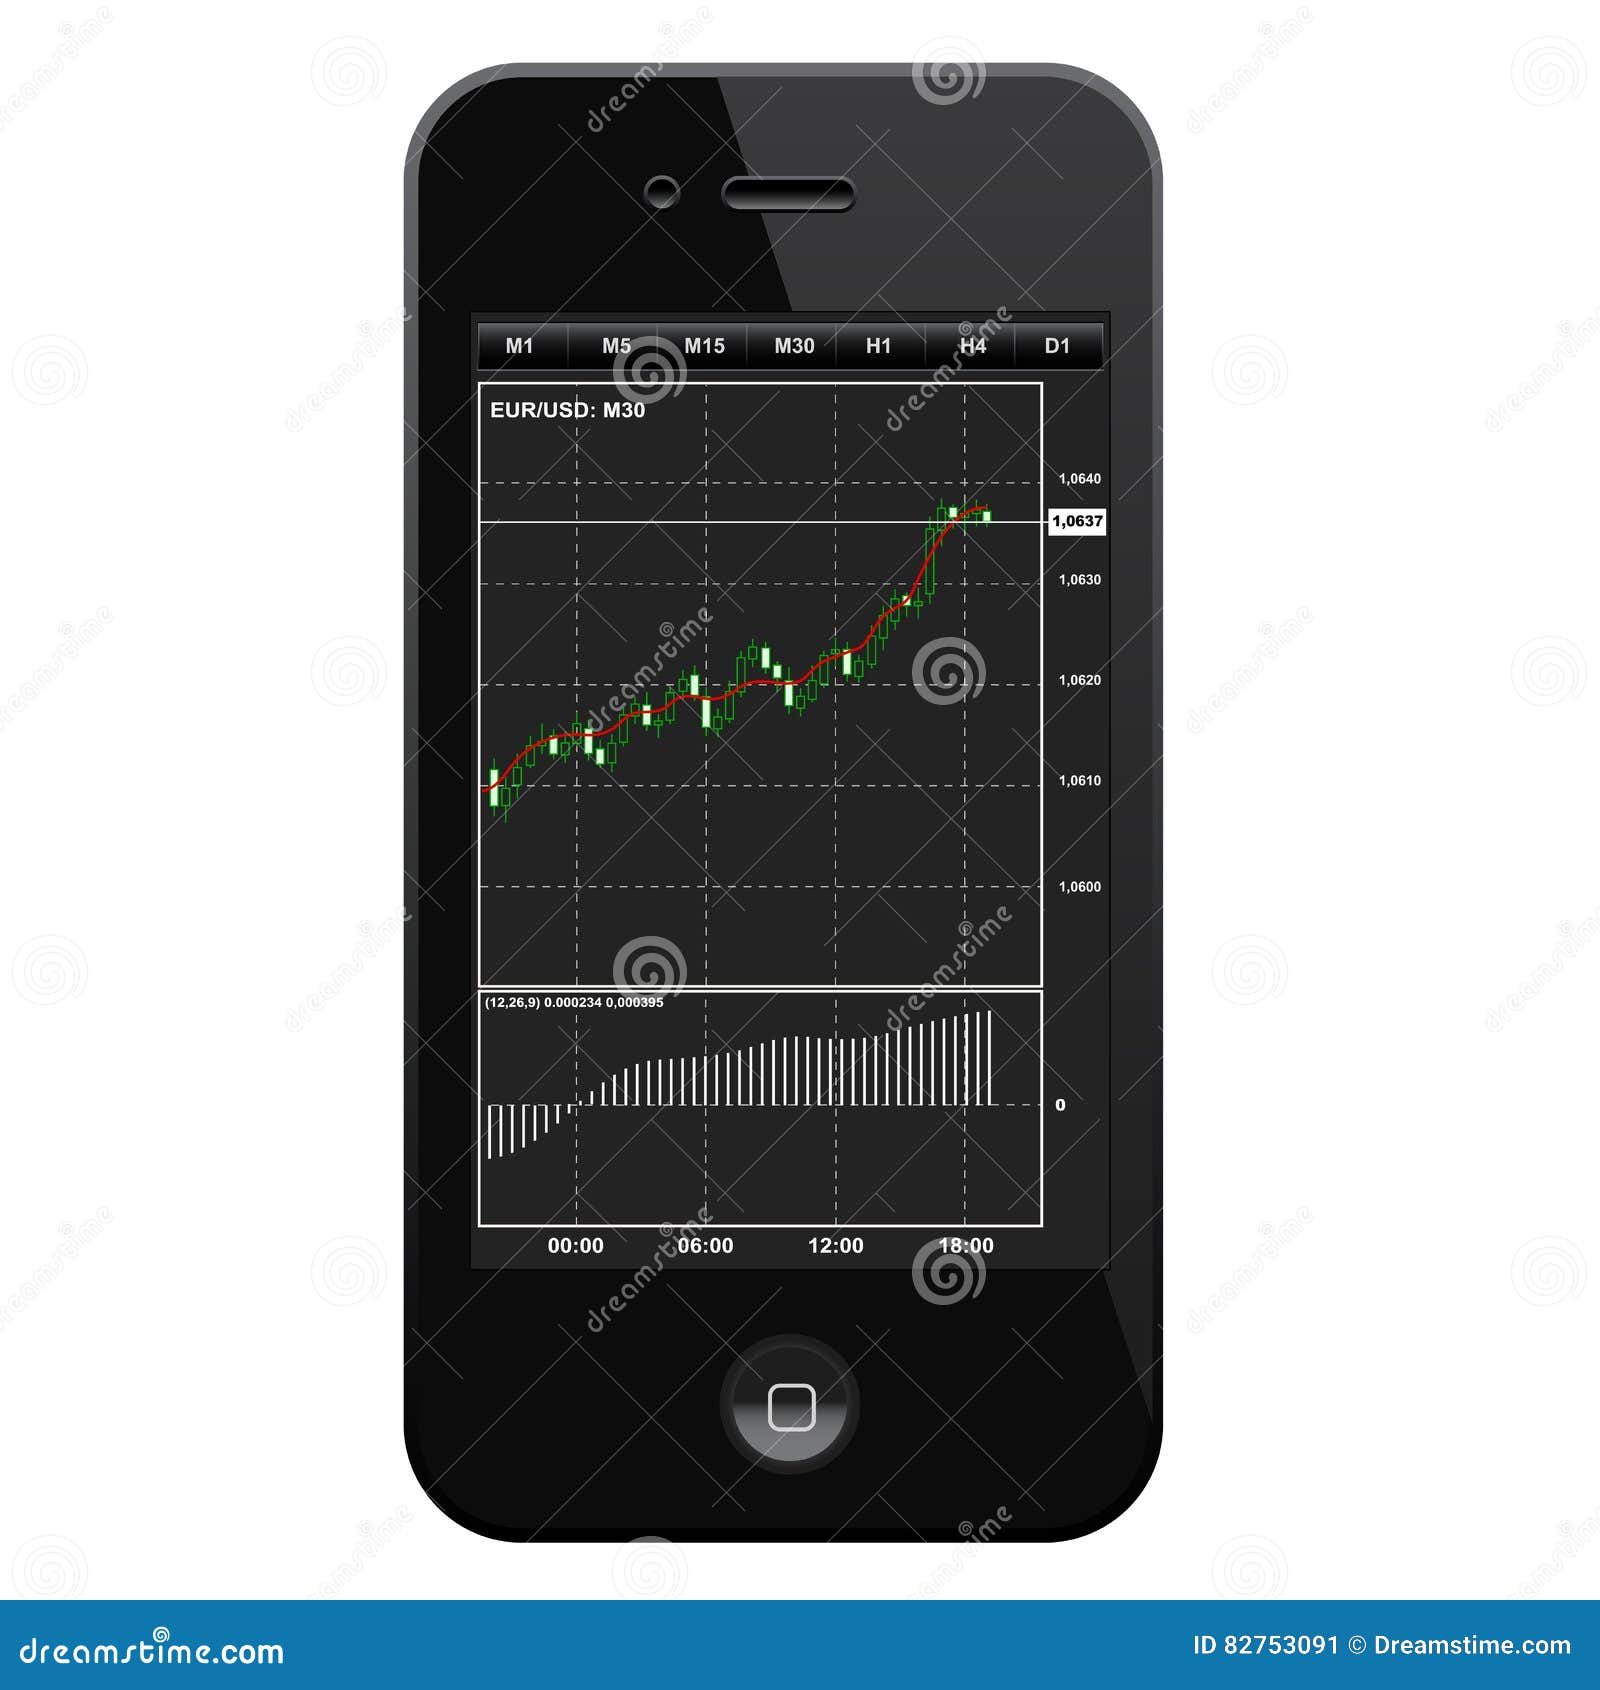 smartphone with traiding terminal application and forex chart on the screen.